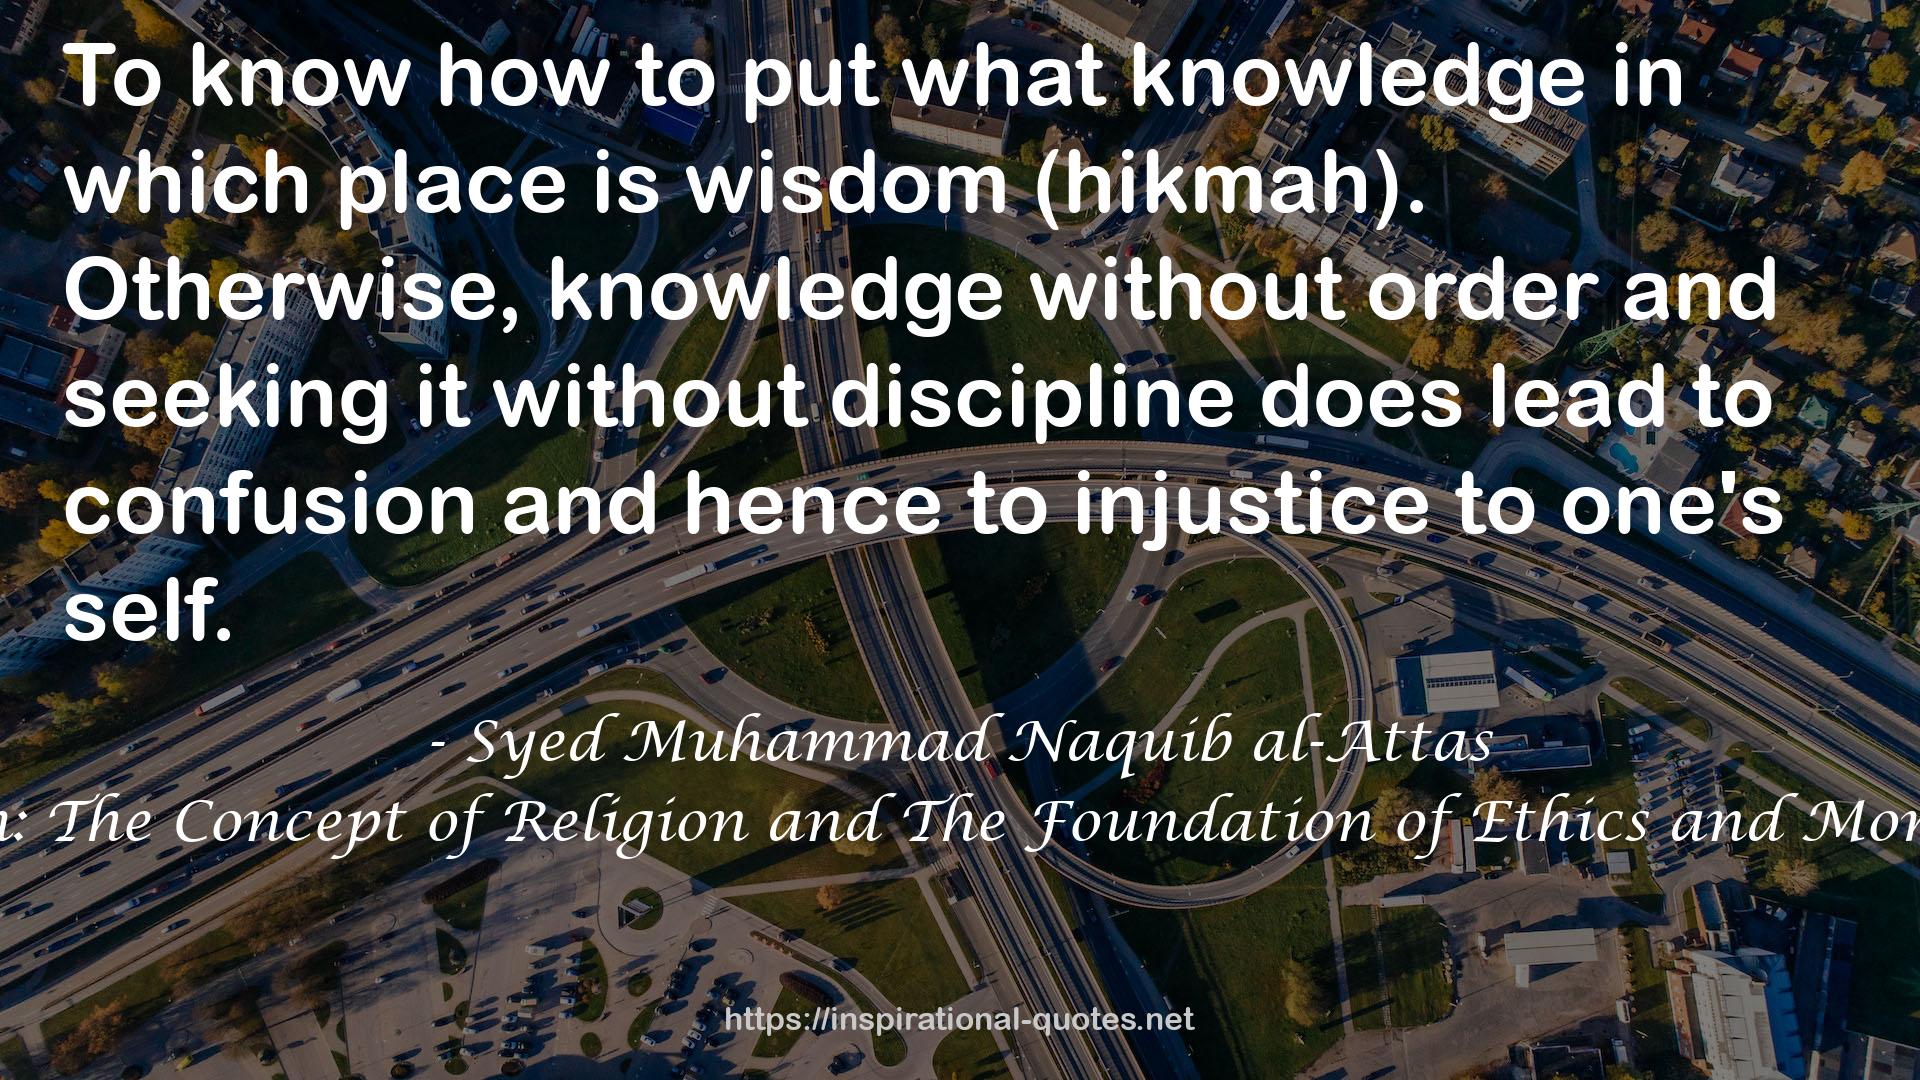 Islam: The Concept of Religion and The Foundation of Ethics and Morality QUOTES